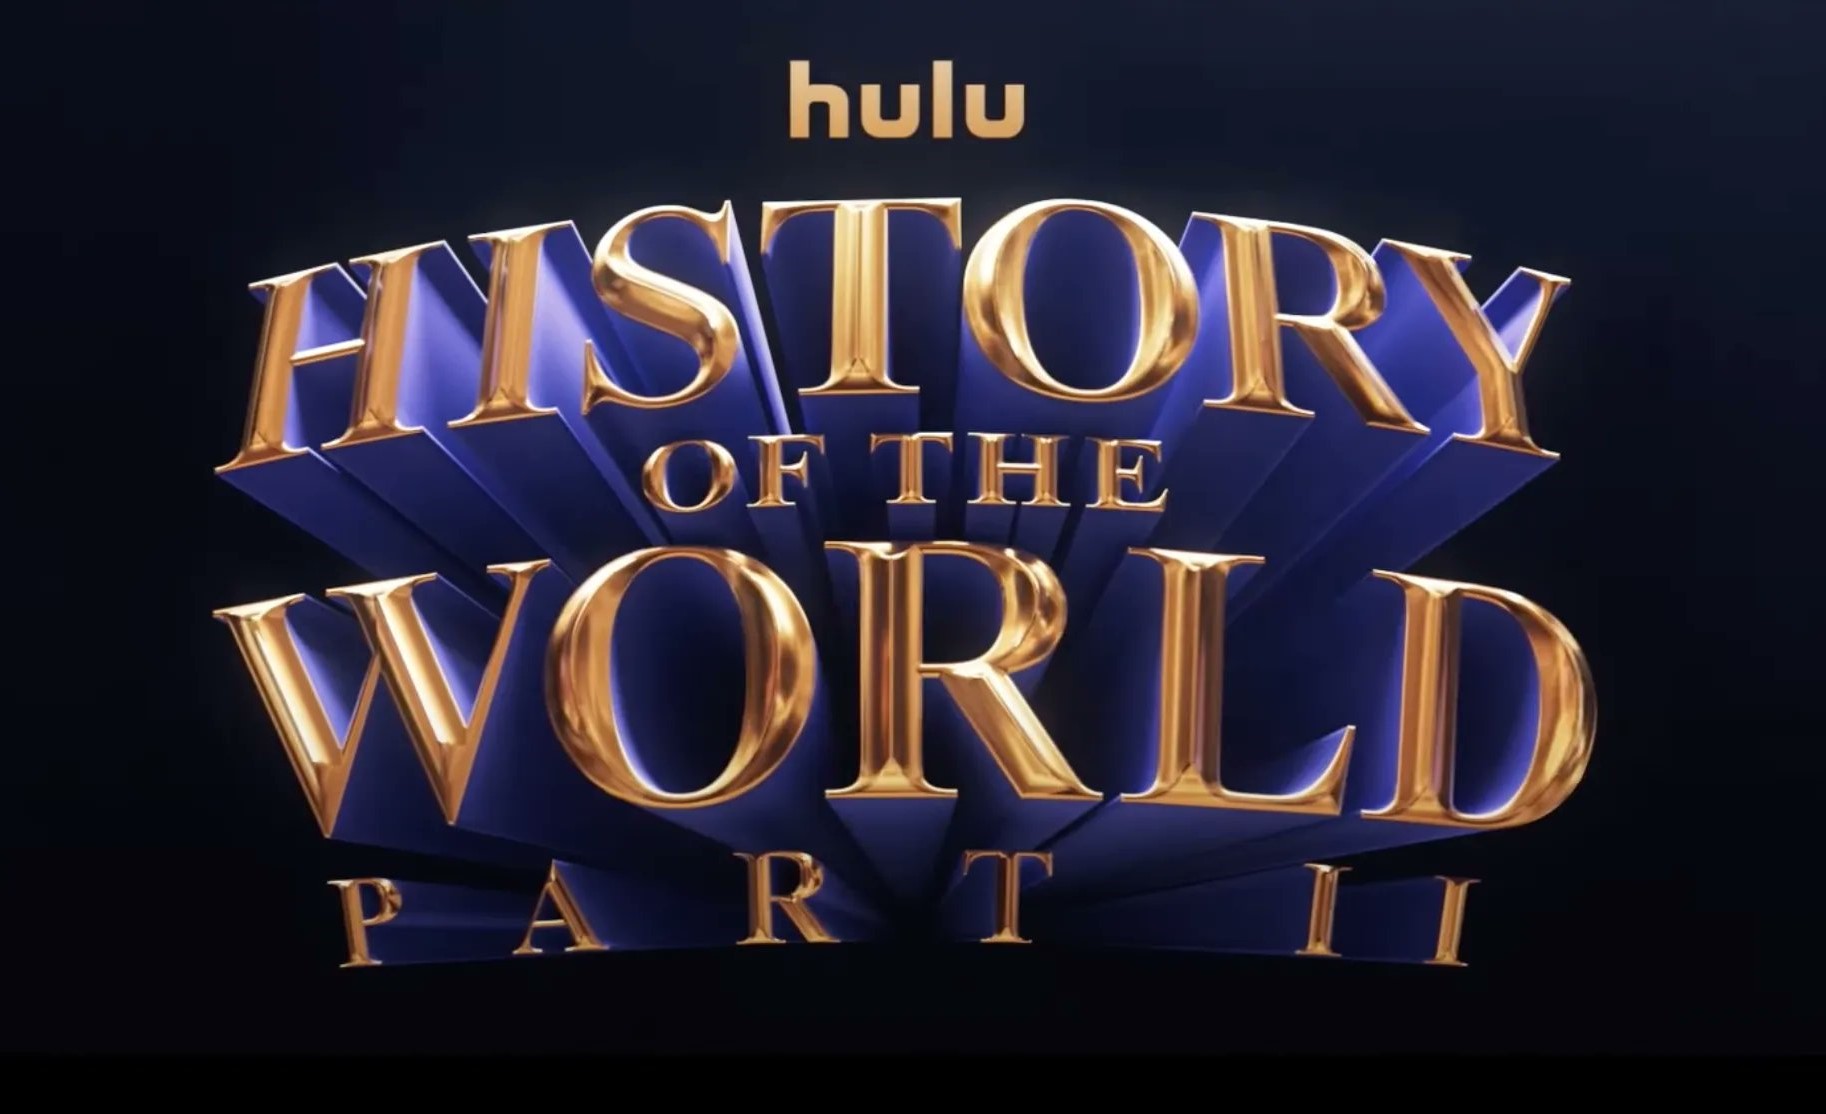 History of the World Part 2